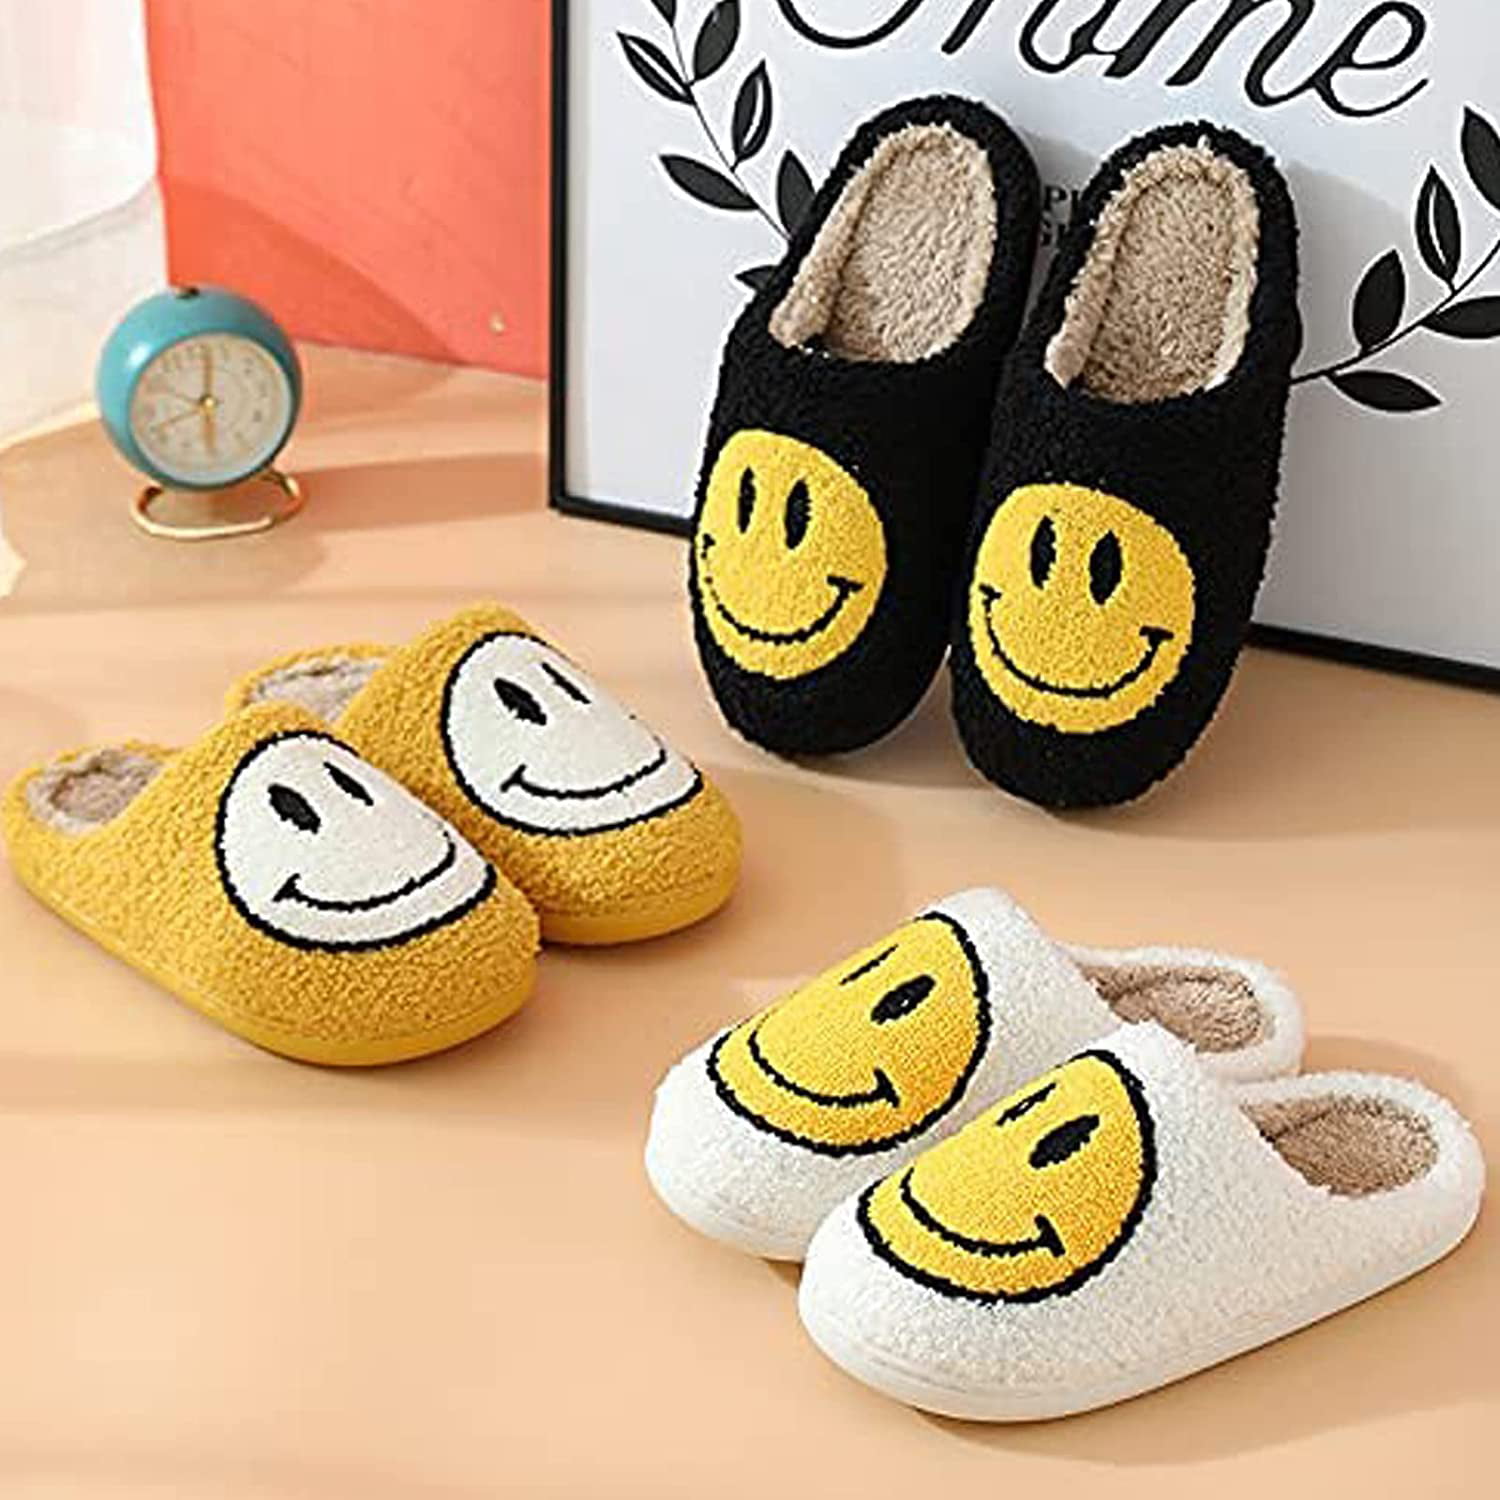 Feel the Joy with Every Step Discover the Enchanting World of Smiley Face Slippers from Walmart